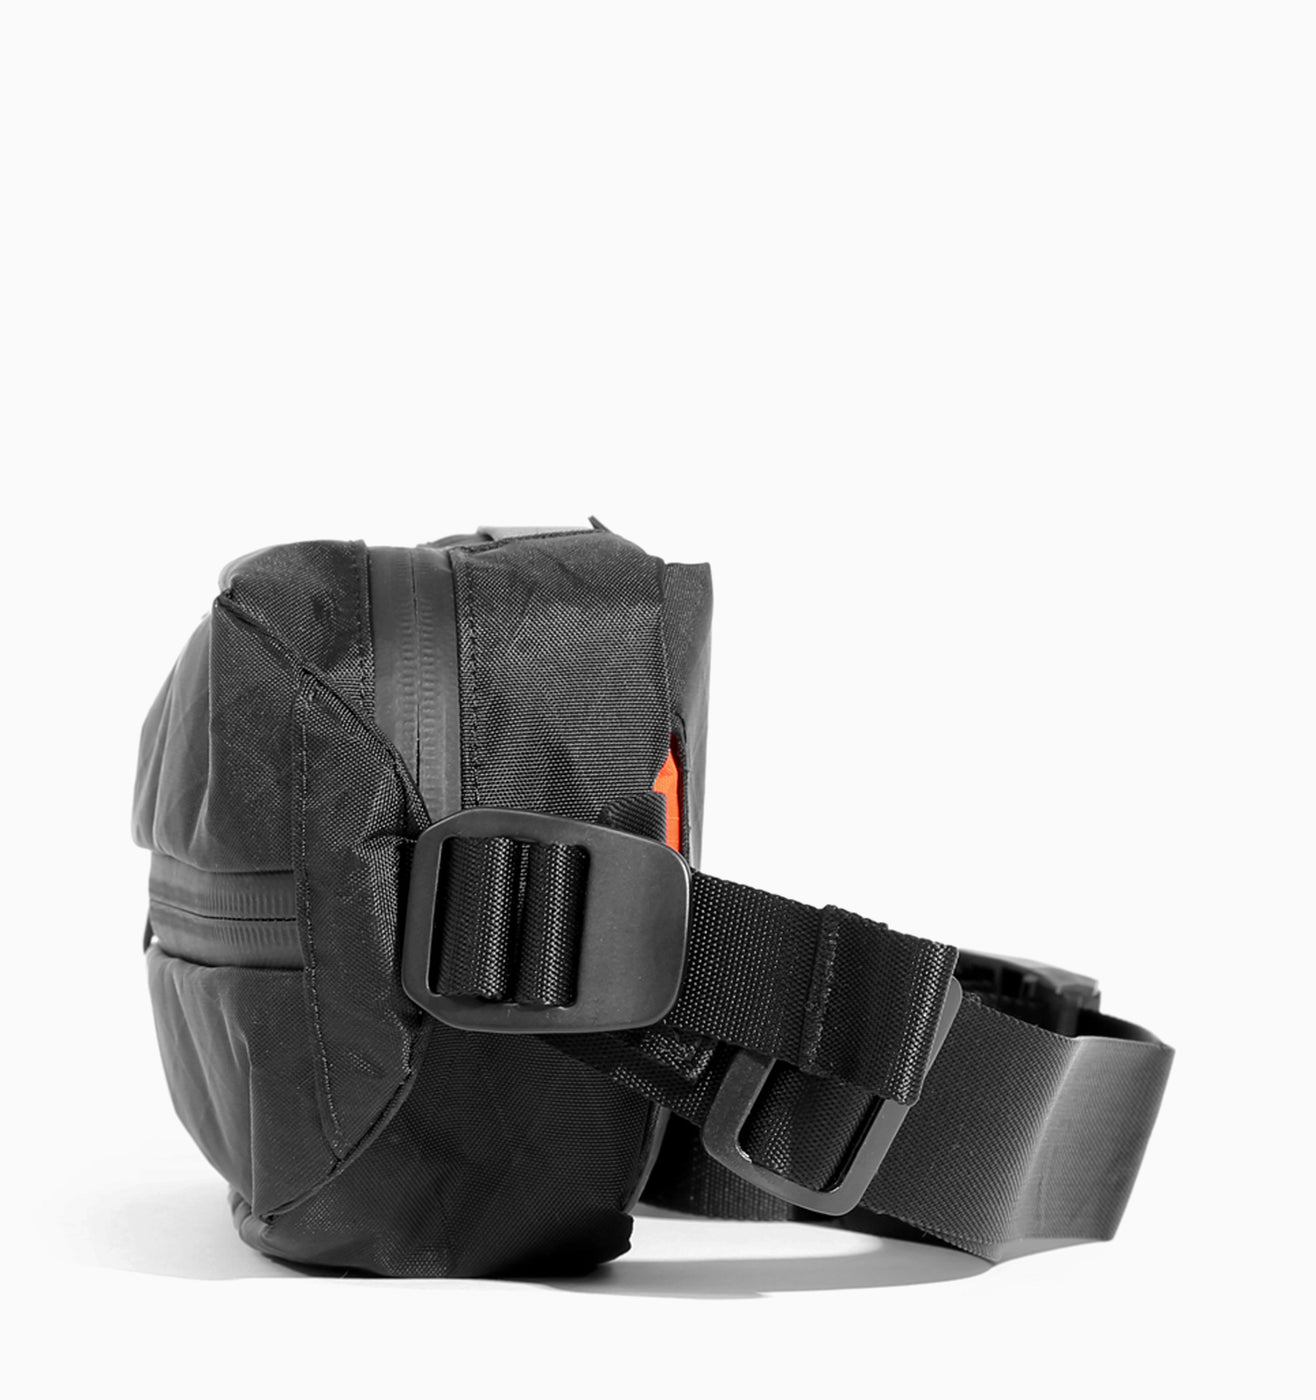 aer city sling 2 review